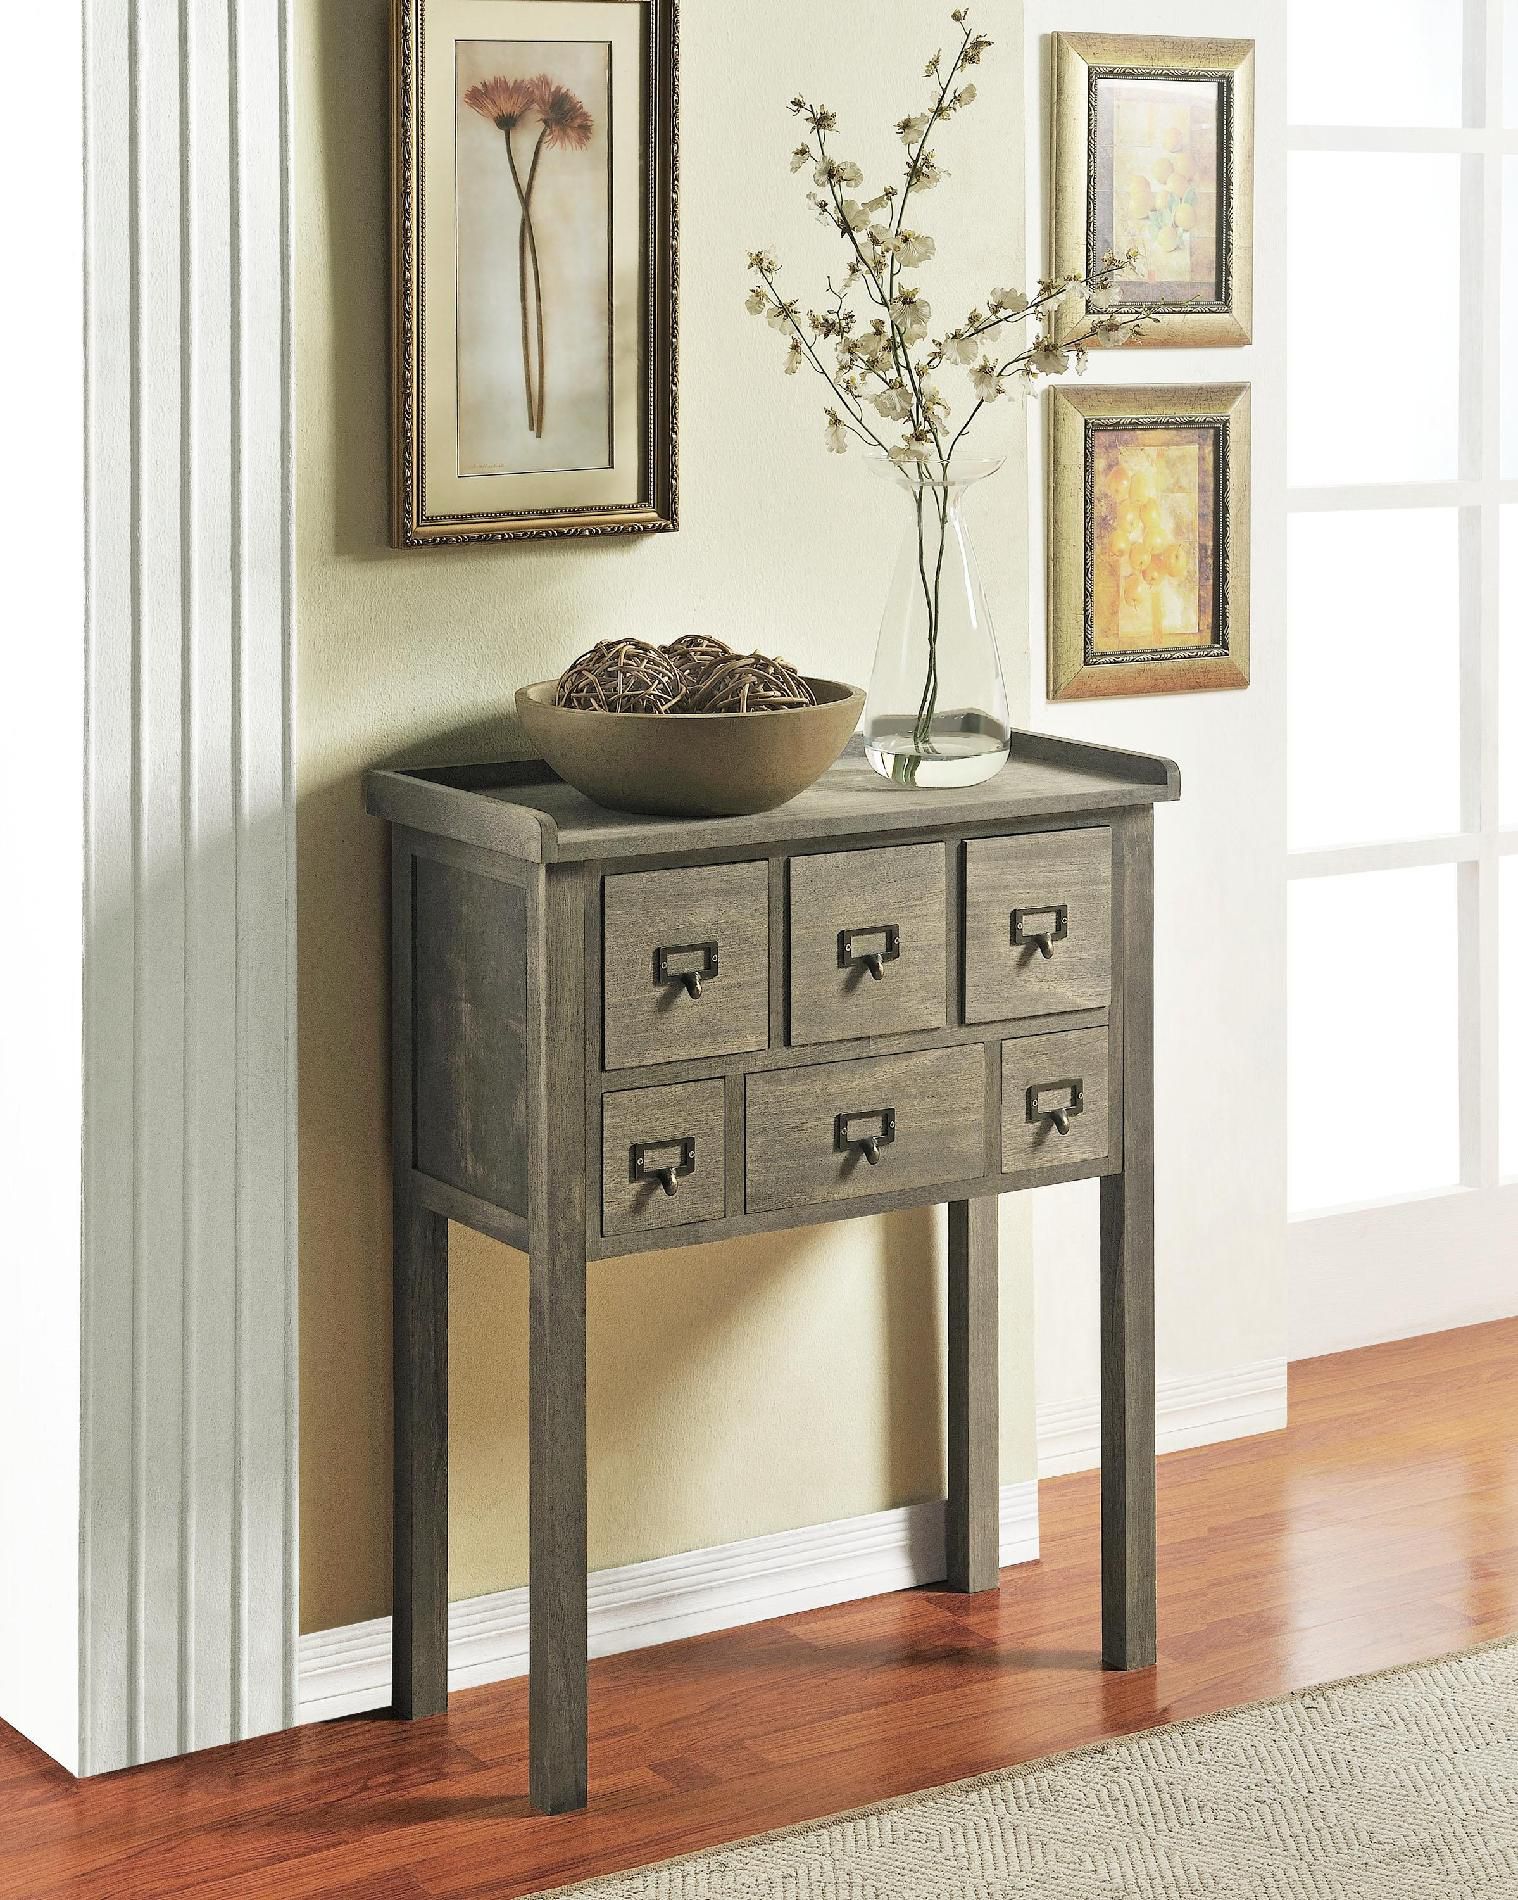 Interior Design Ideas Small Space Gray Entryway Storage And